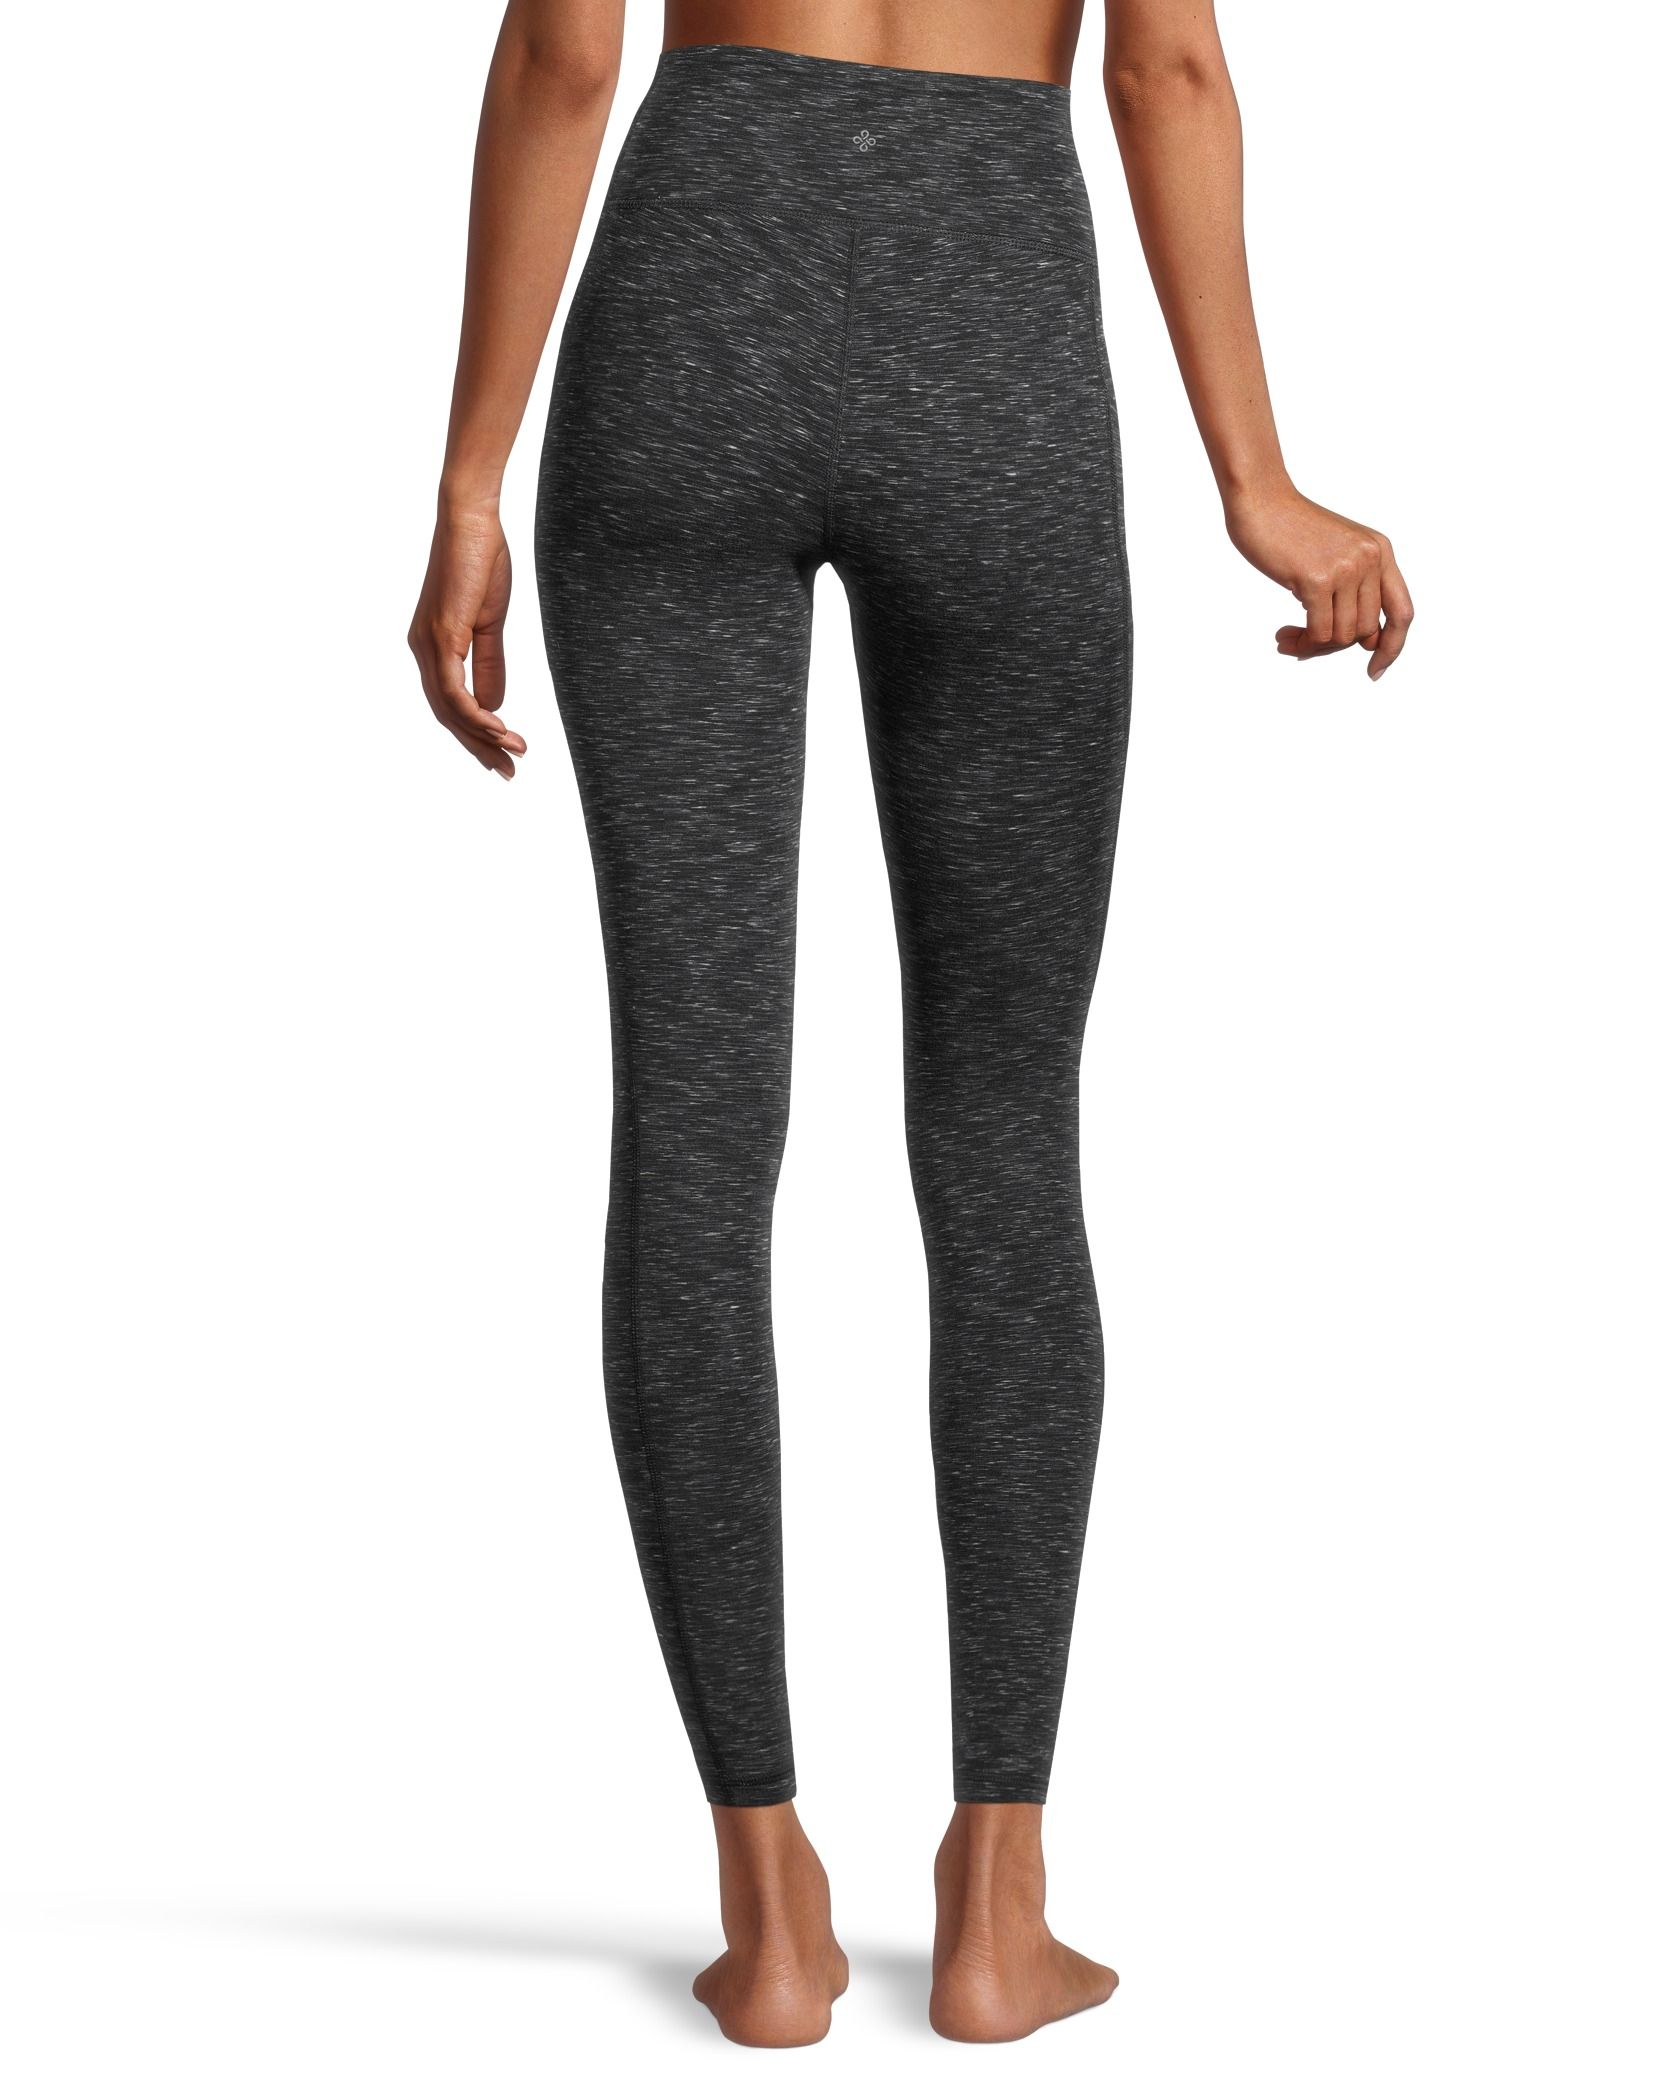  Member's Mark Luxe Yoga Pant in Black Multi Space Dye, Size  Small : Clothing, Shoes & Jewelry